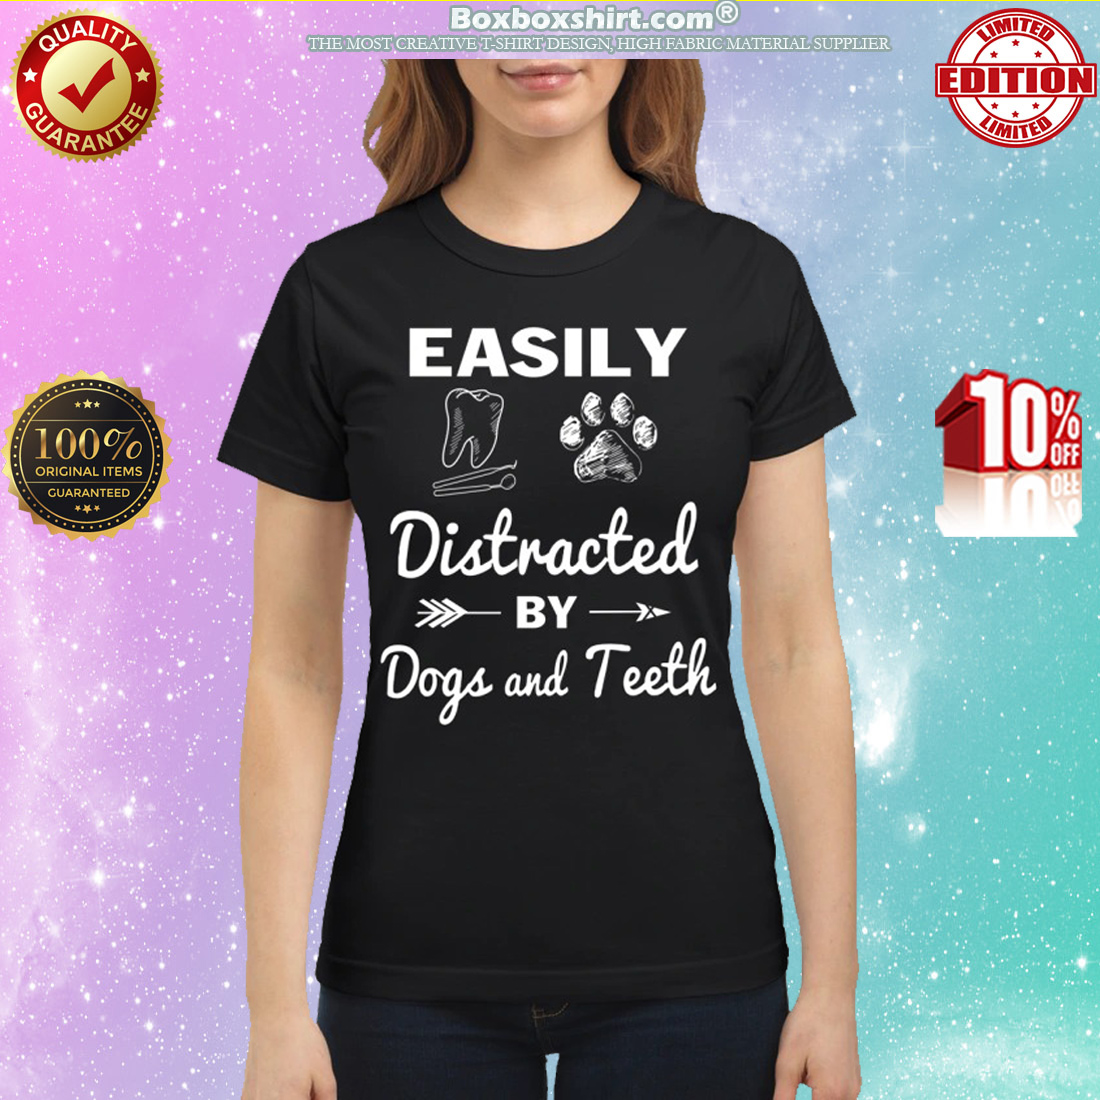 Easily distracted by dogs and teeth classic shirt